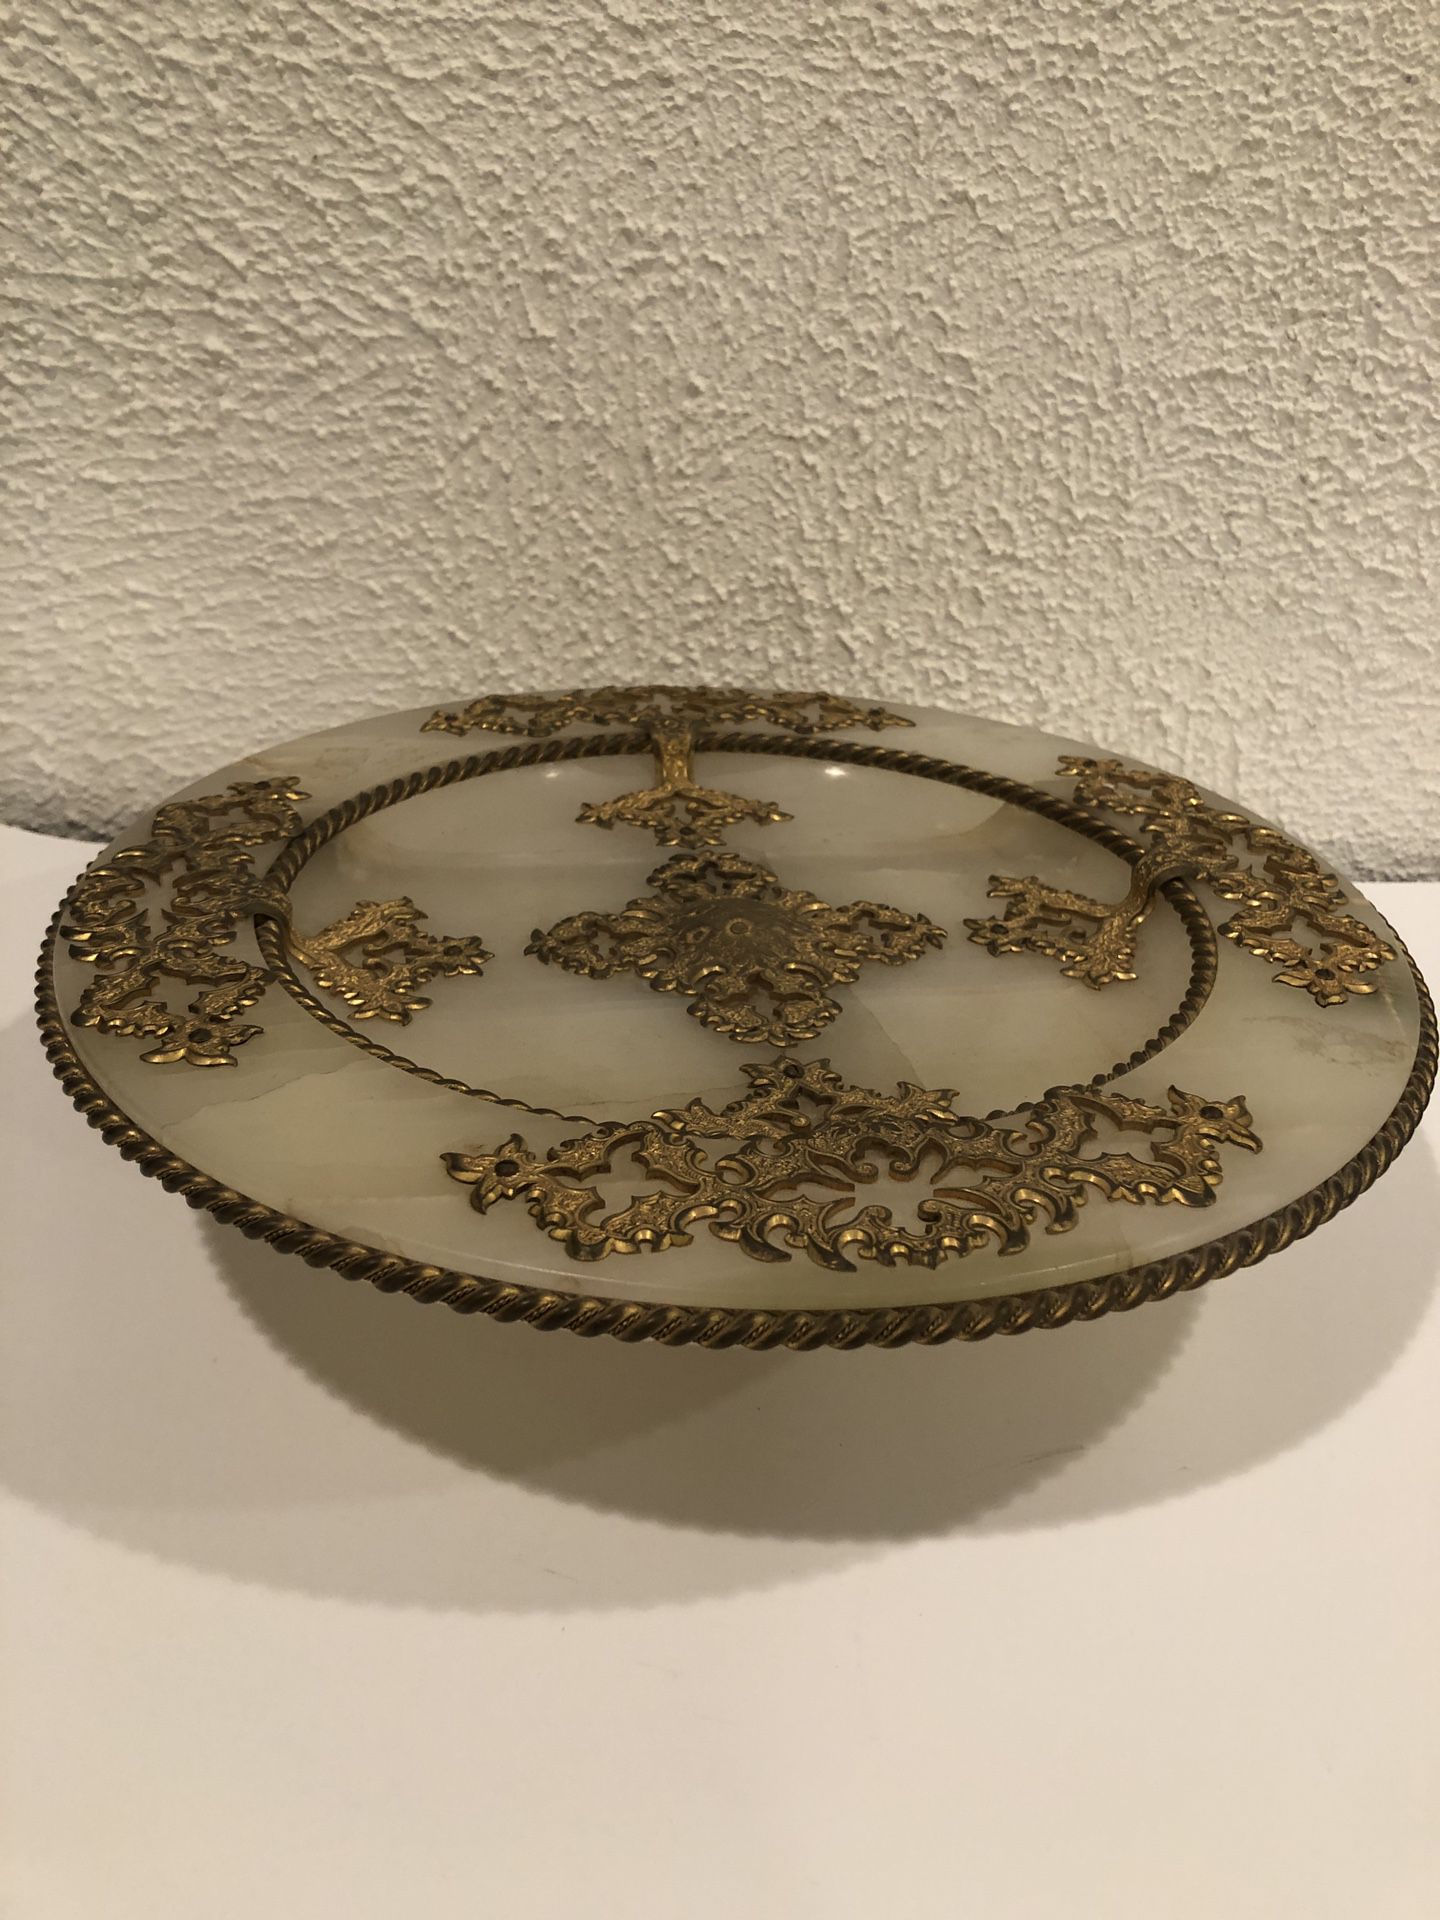 Antique Rare Footed Center Piece Made Of Marble And Bronze Center Piece 12” Wide And 3 “ Height 